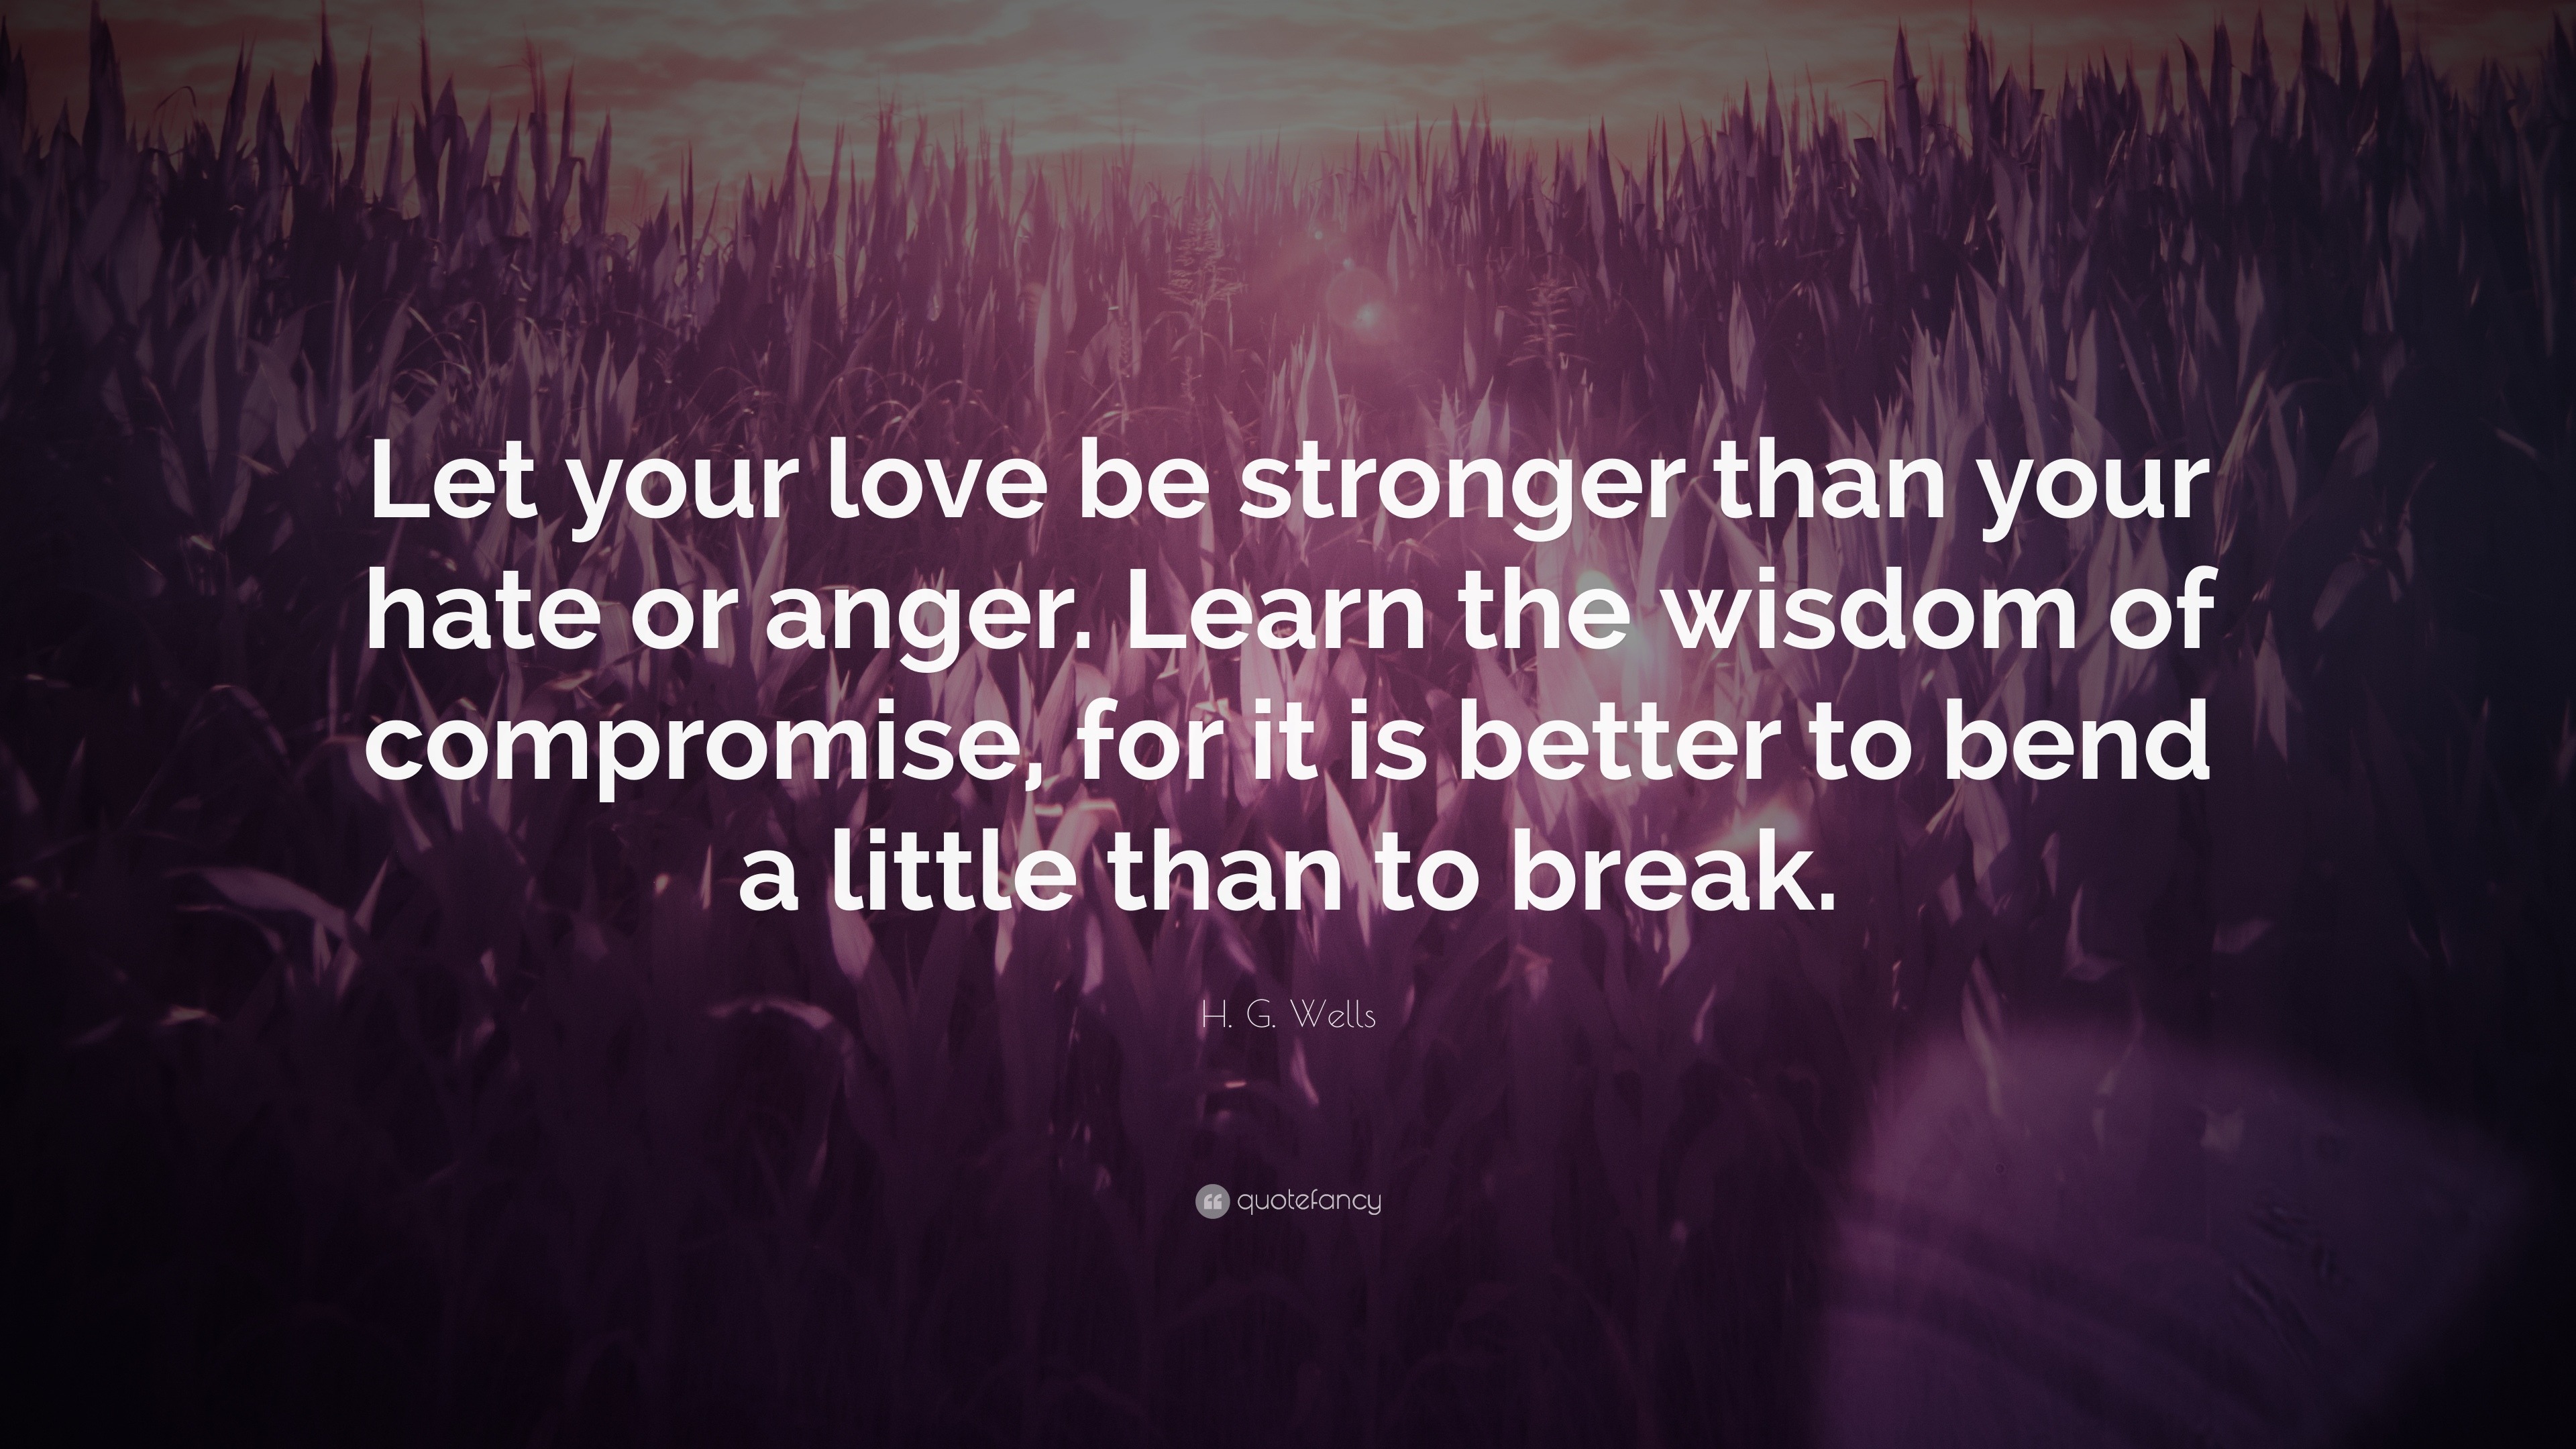 H G Wells Quote “Let your love be stronger than your hate or anger